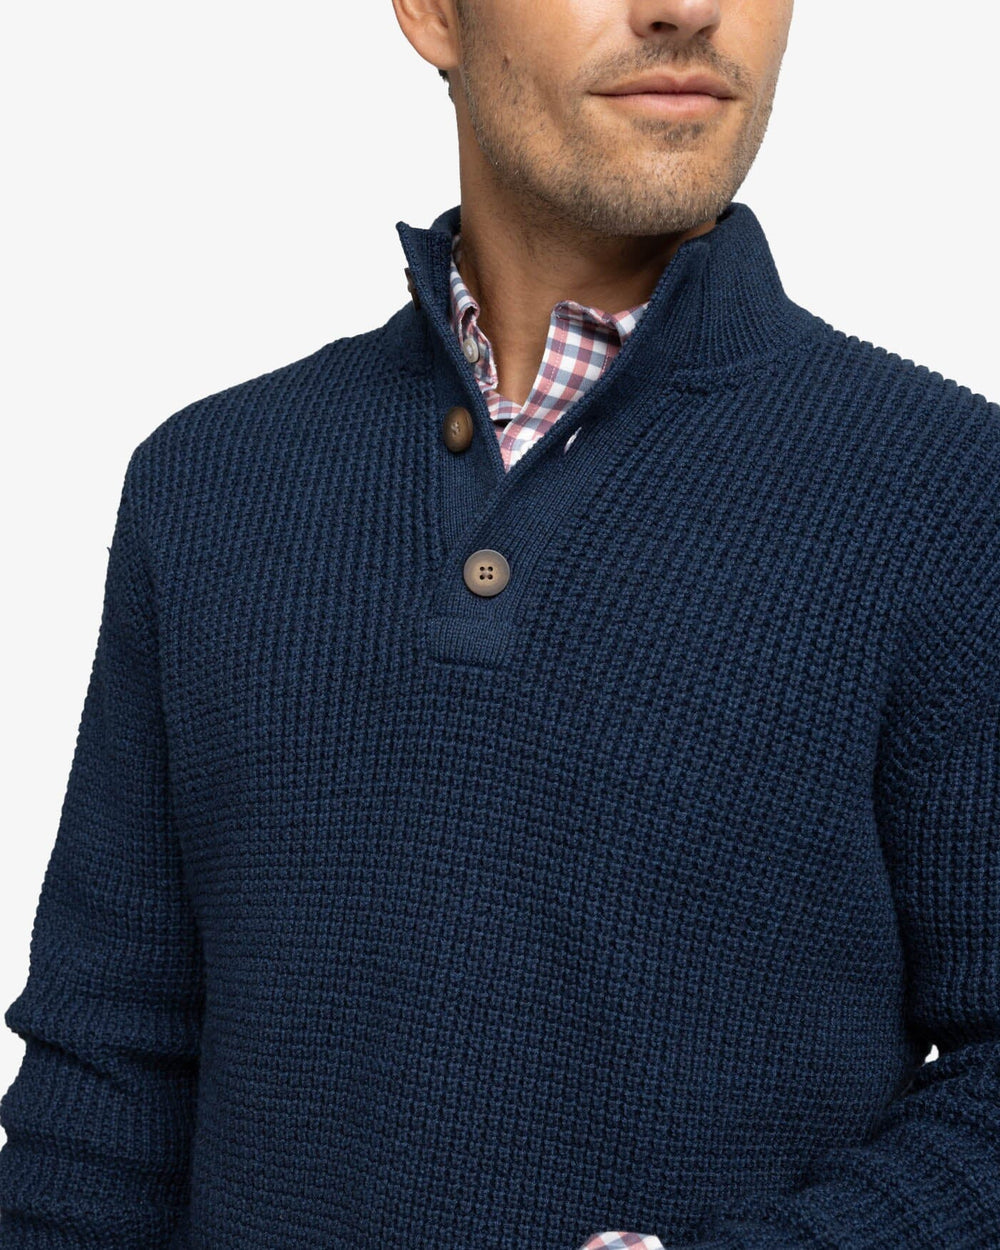 The detail view of the Southern Tide Westmont Heather Jade Quarter Zip Button by Southern Tide - Heather Dress Blue